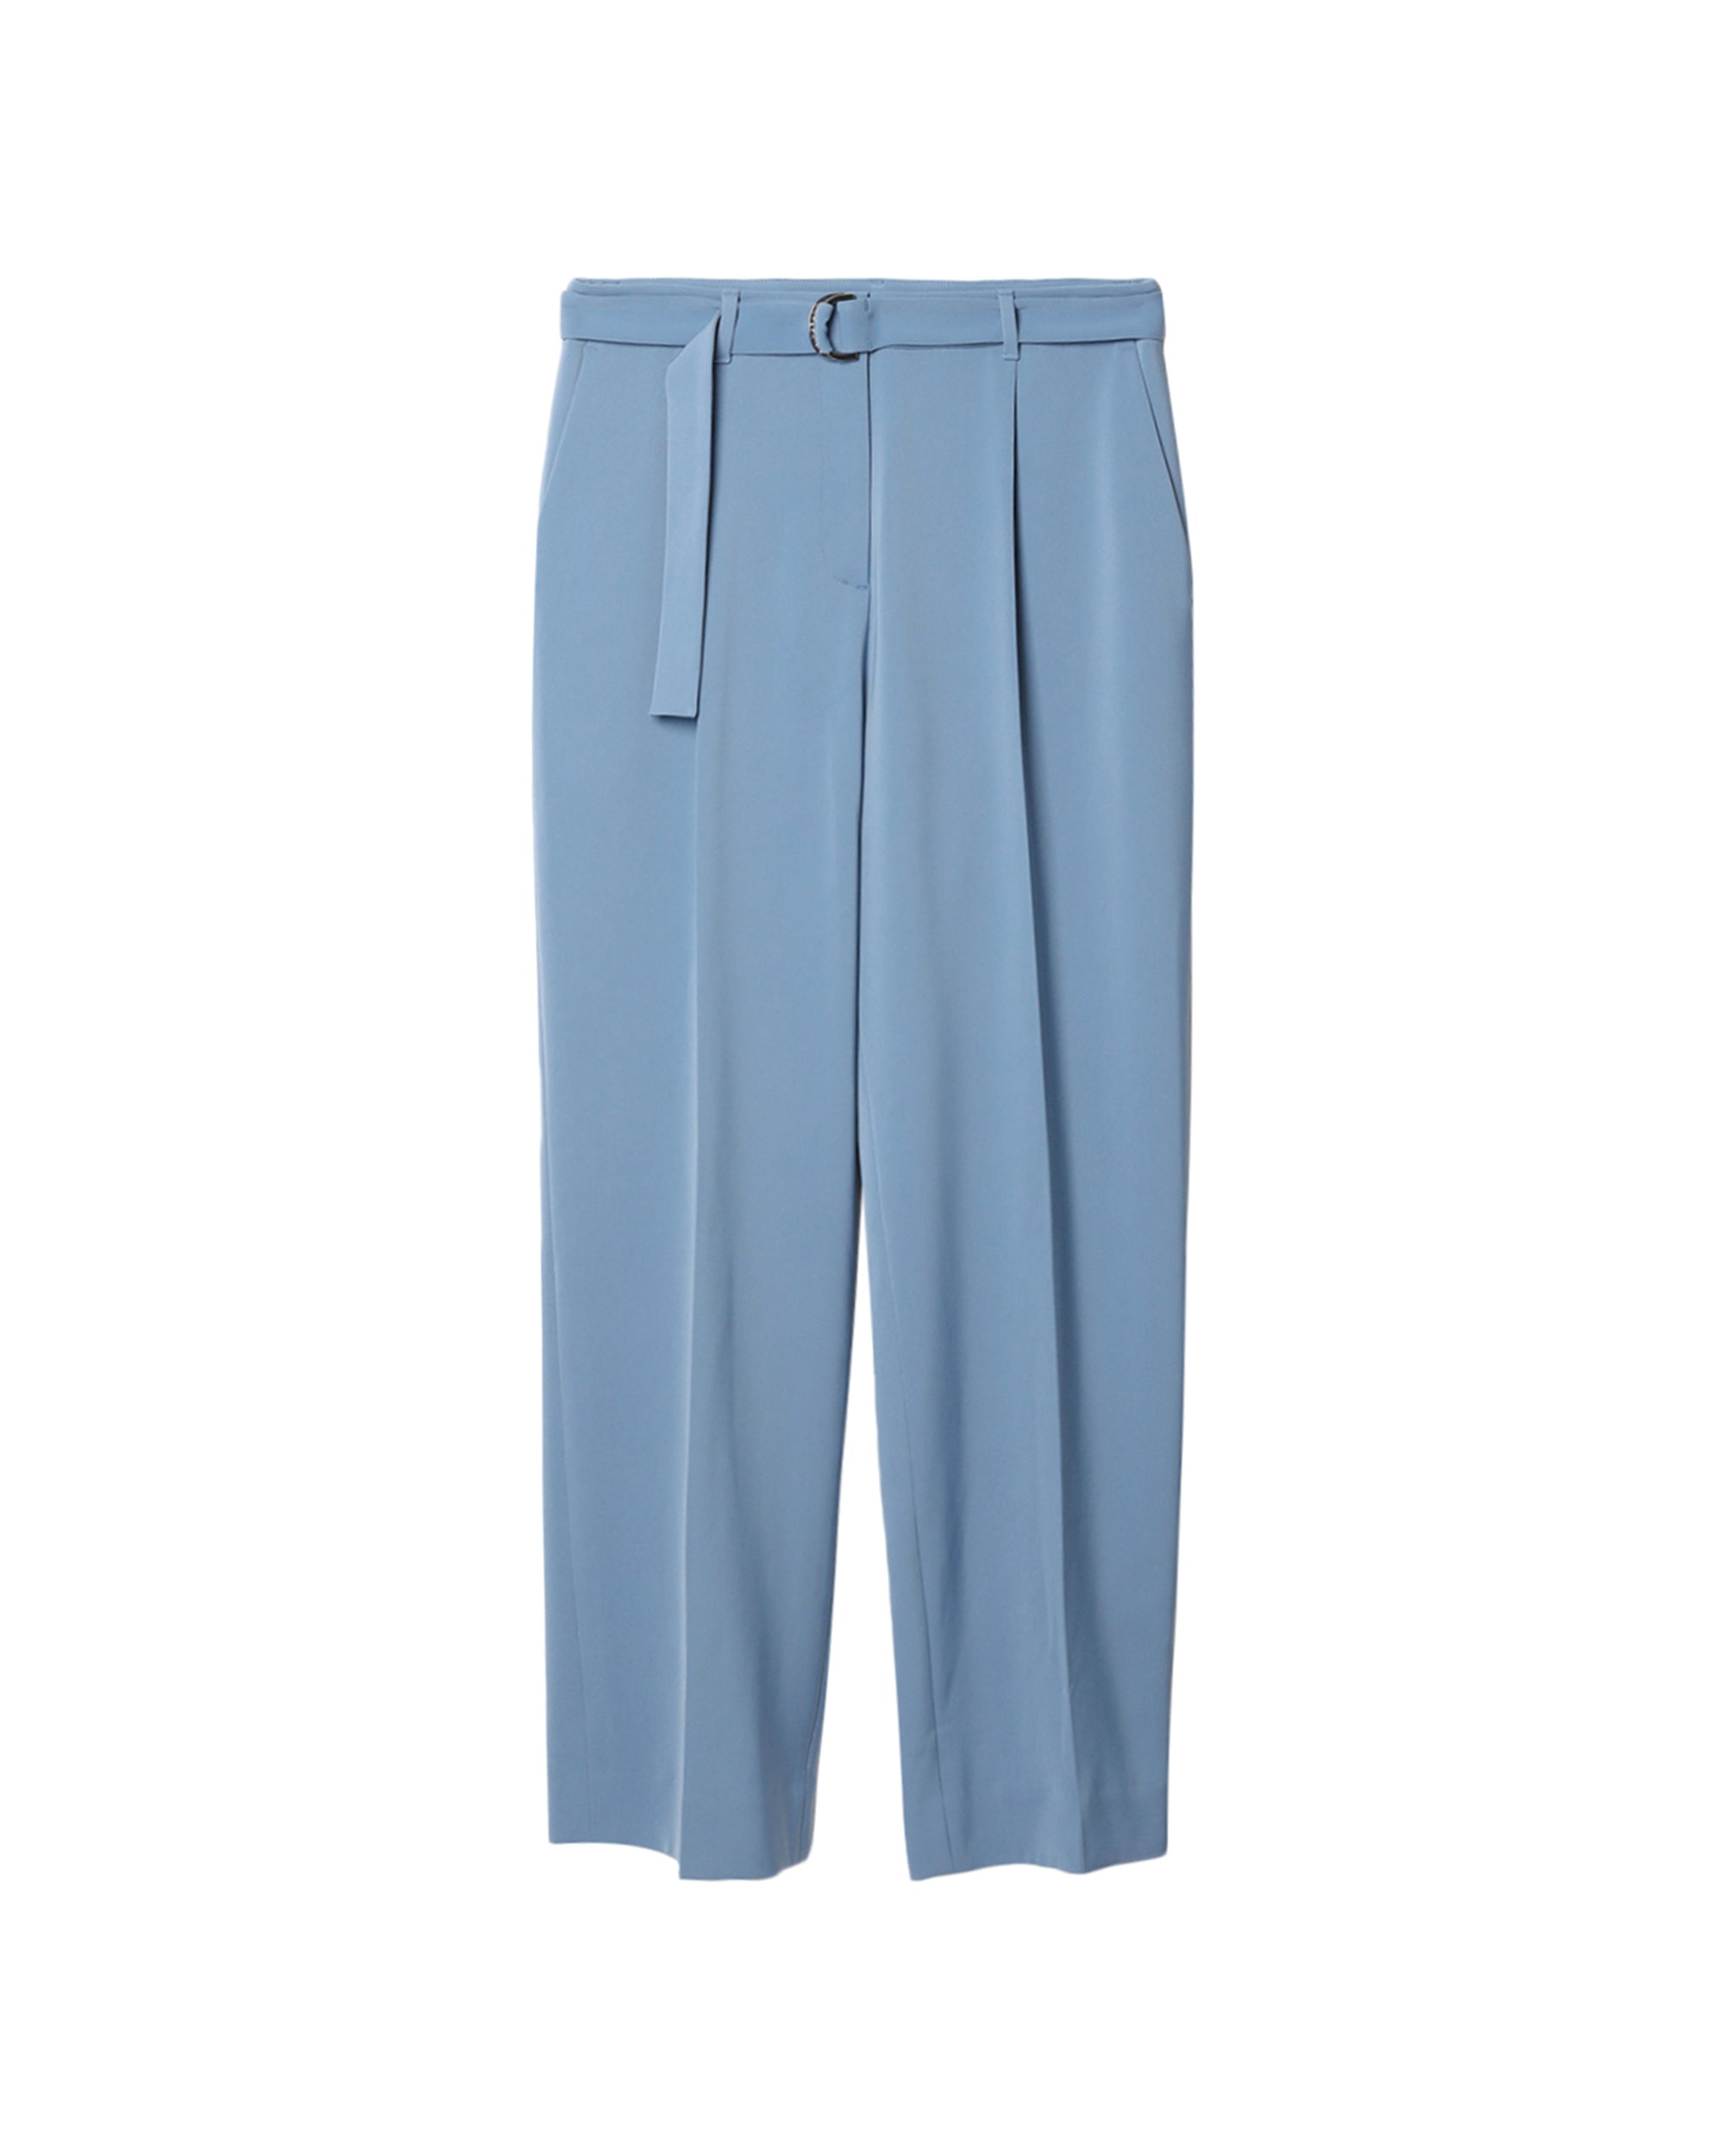 Easy Care Poly Pants